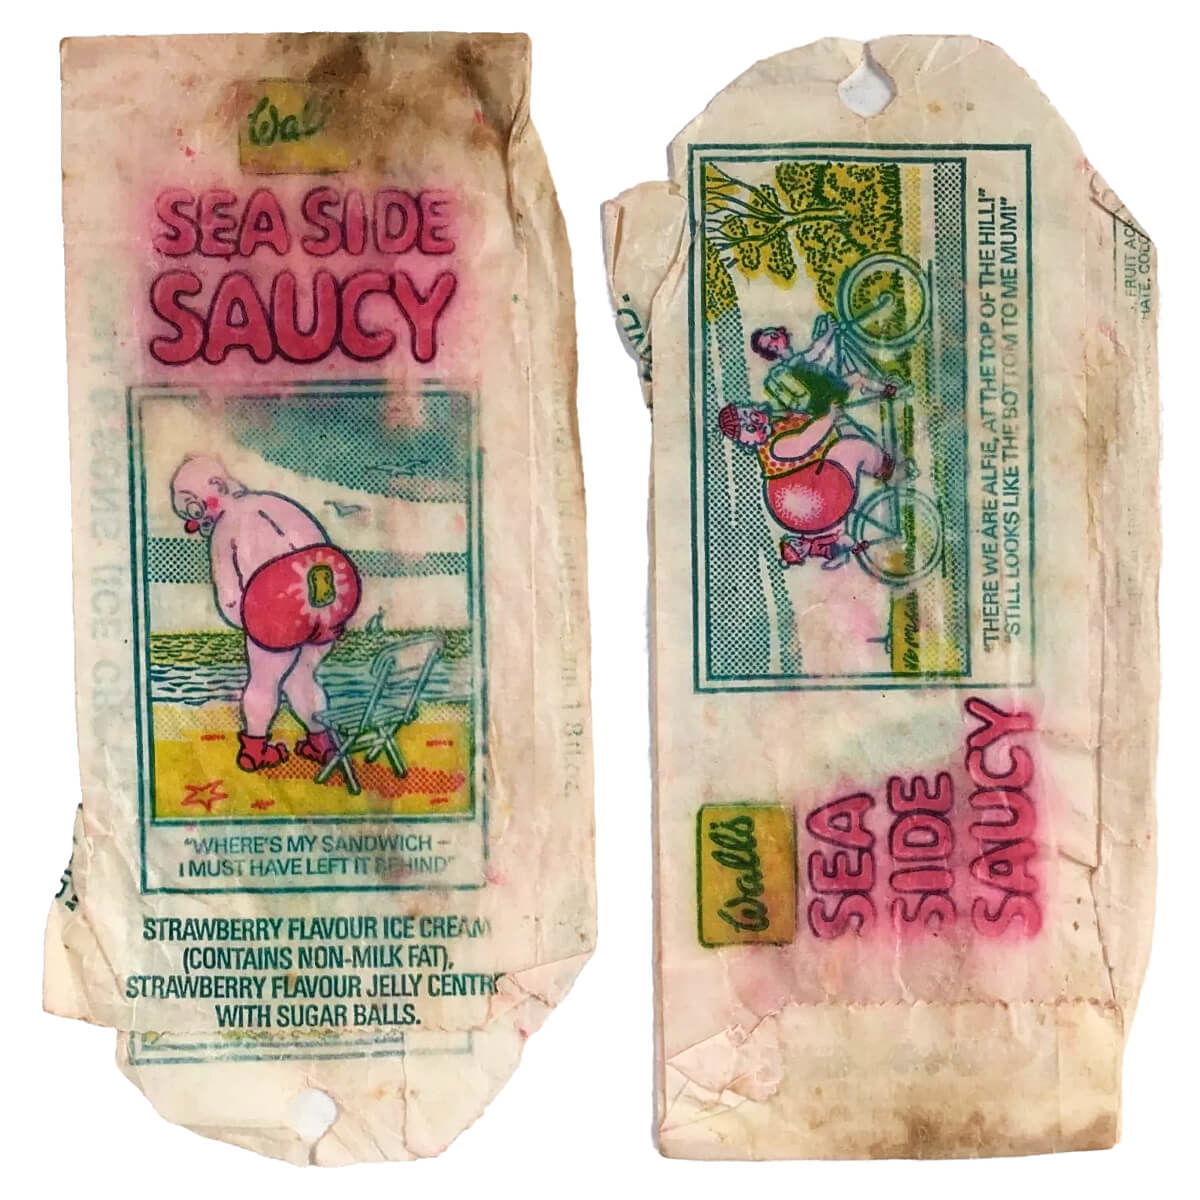 Wall's Sea Side Saucy, ice lolly wrapper, front and rear view